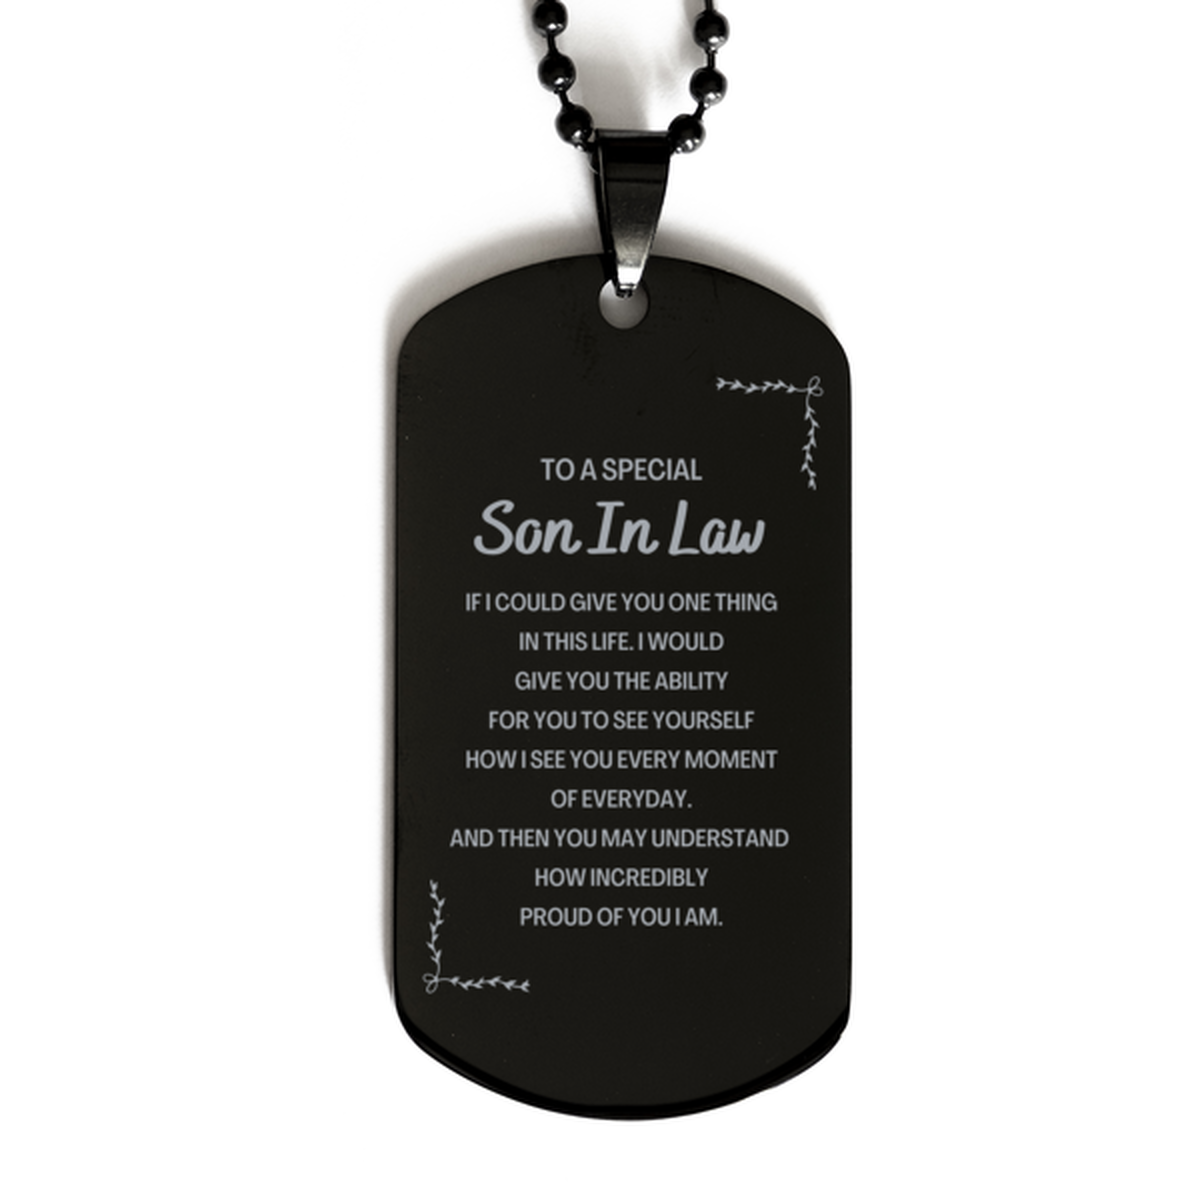 To My Son In Law Black Dog Tag, Gifts For Son In Law Engraved, Inspirational Gifts for Christmas Birthday, Epic Gifts for Son In Law To A Special Son In Law how incredibly proud of you I am